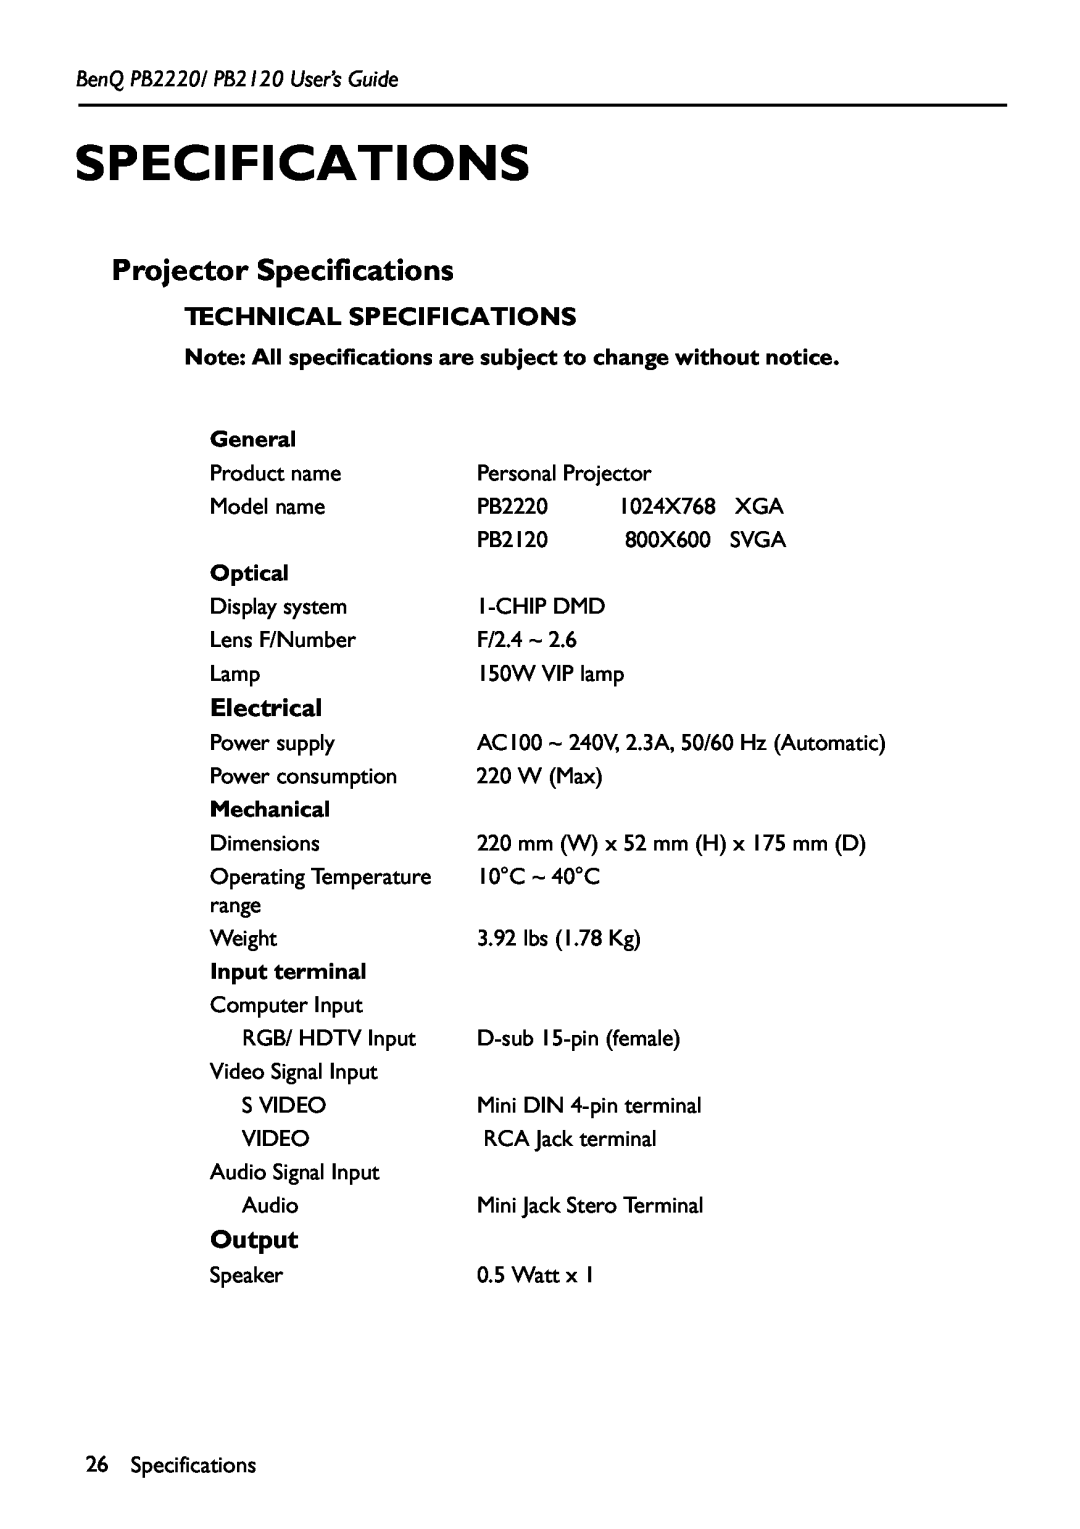 BenQ PB2220/ PB2120 manual Projector Specifications, Technical Specifications, Electrical, Output 